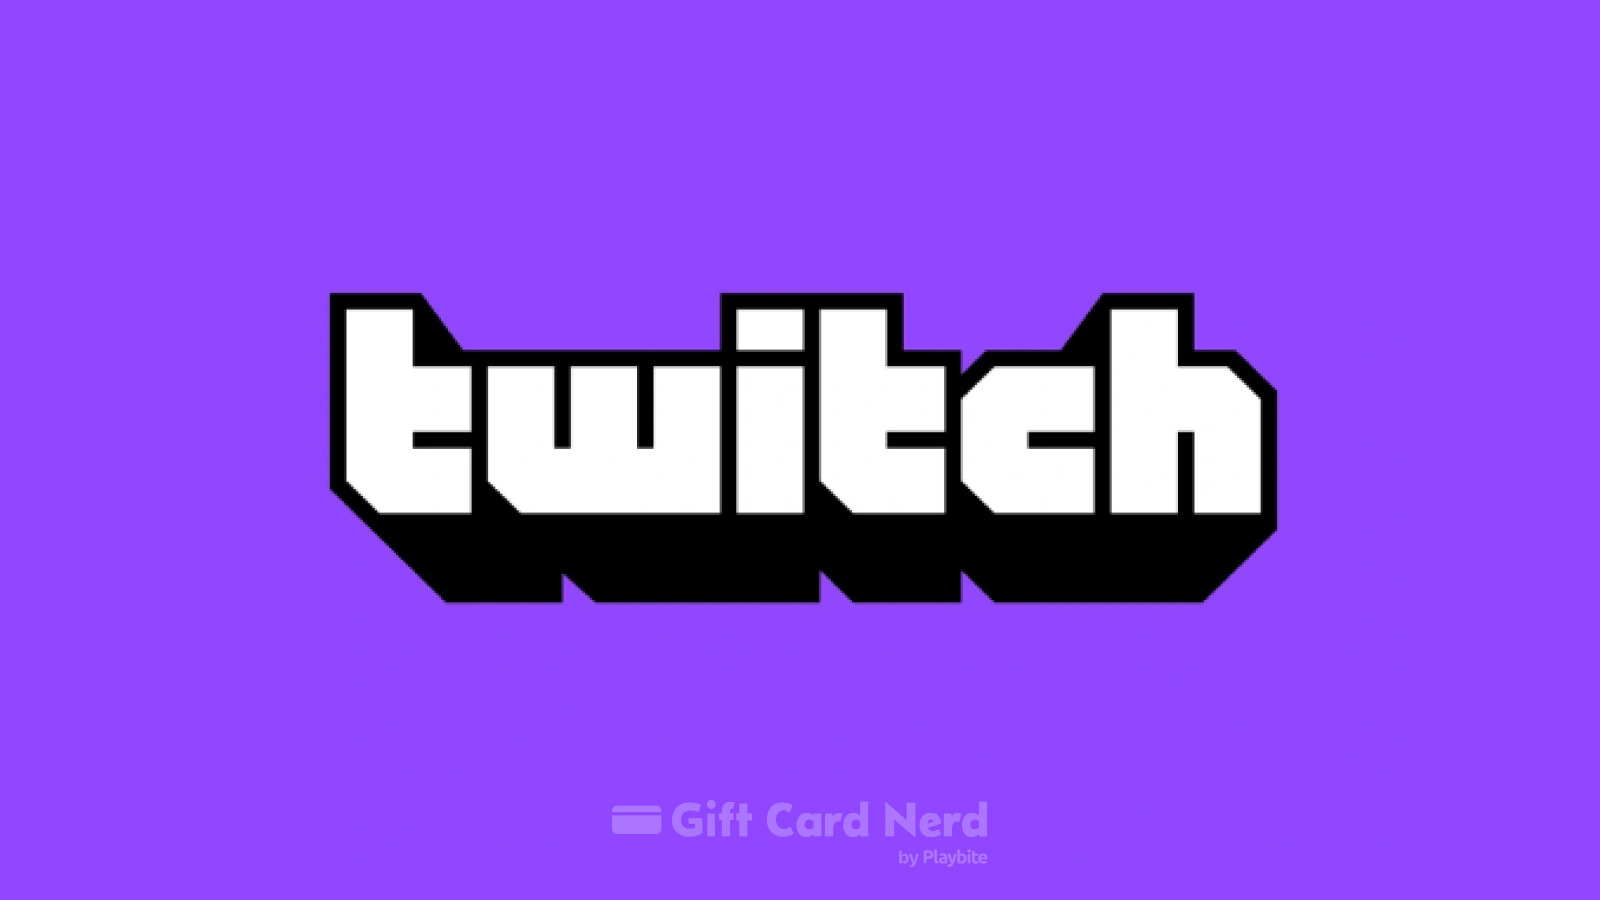 Does Target Sell Twitch Gift Cards?